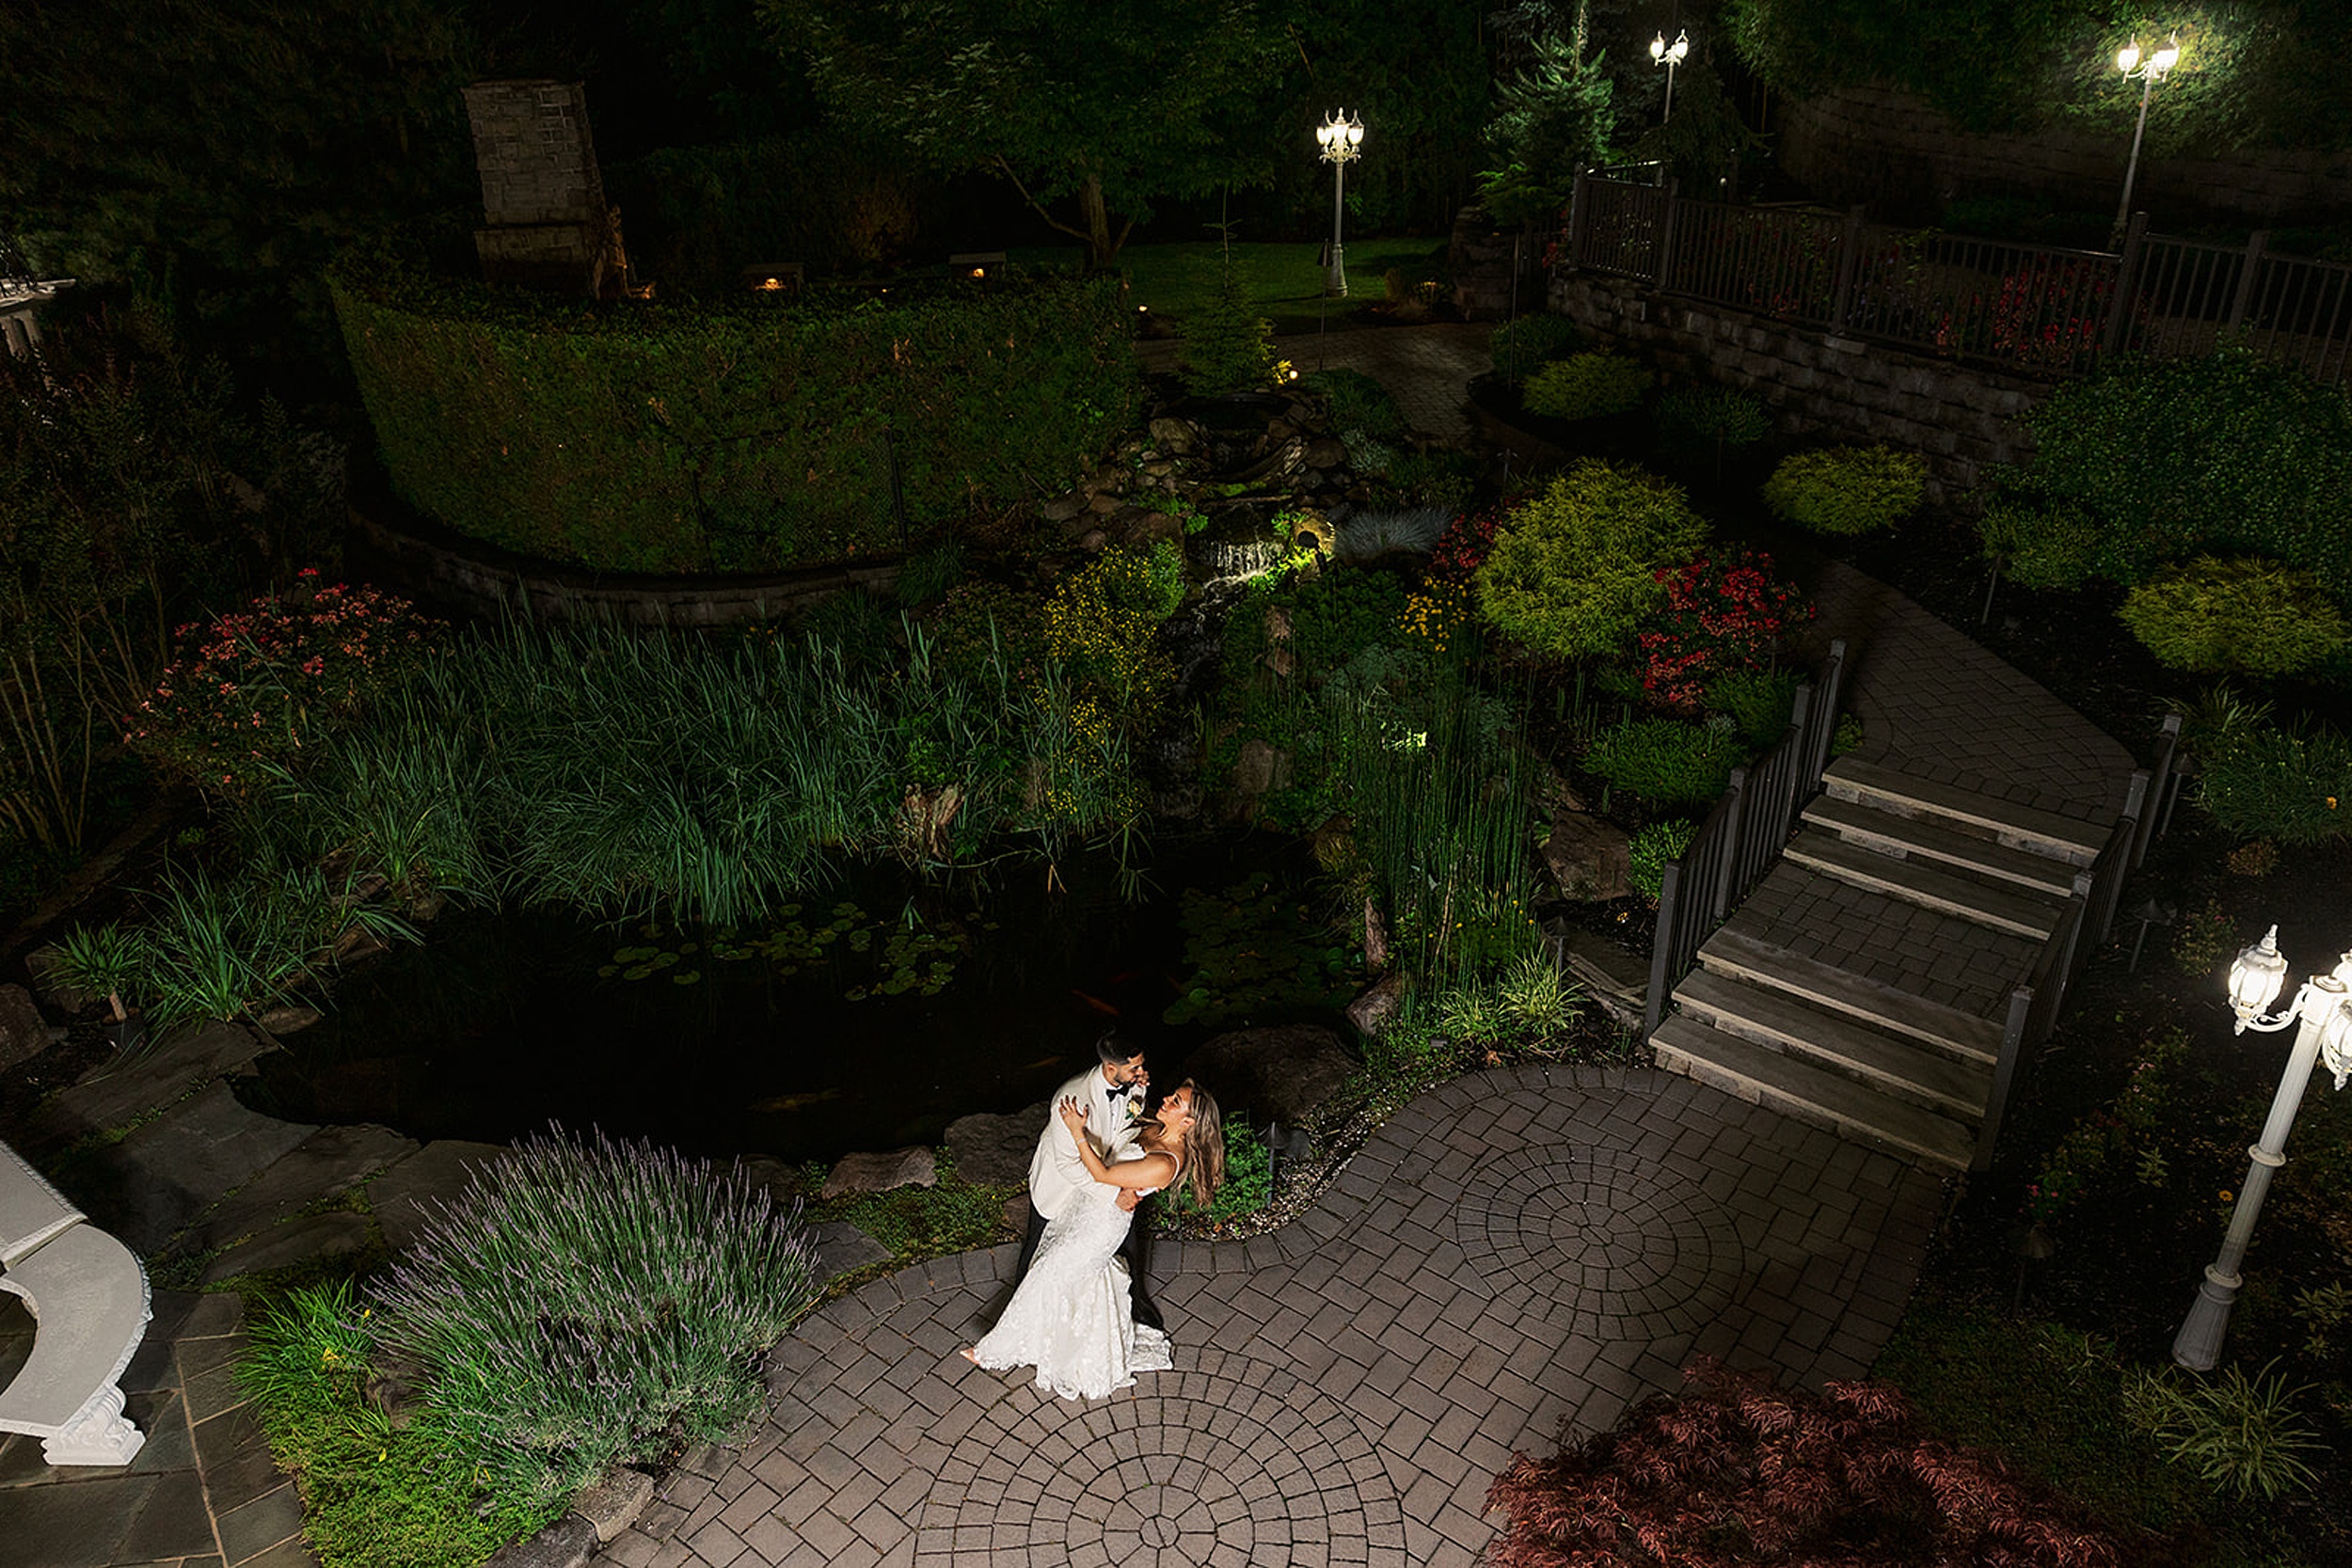 Newlyweds dance in a garden path by a pond at night at their valley regency wedding